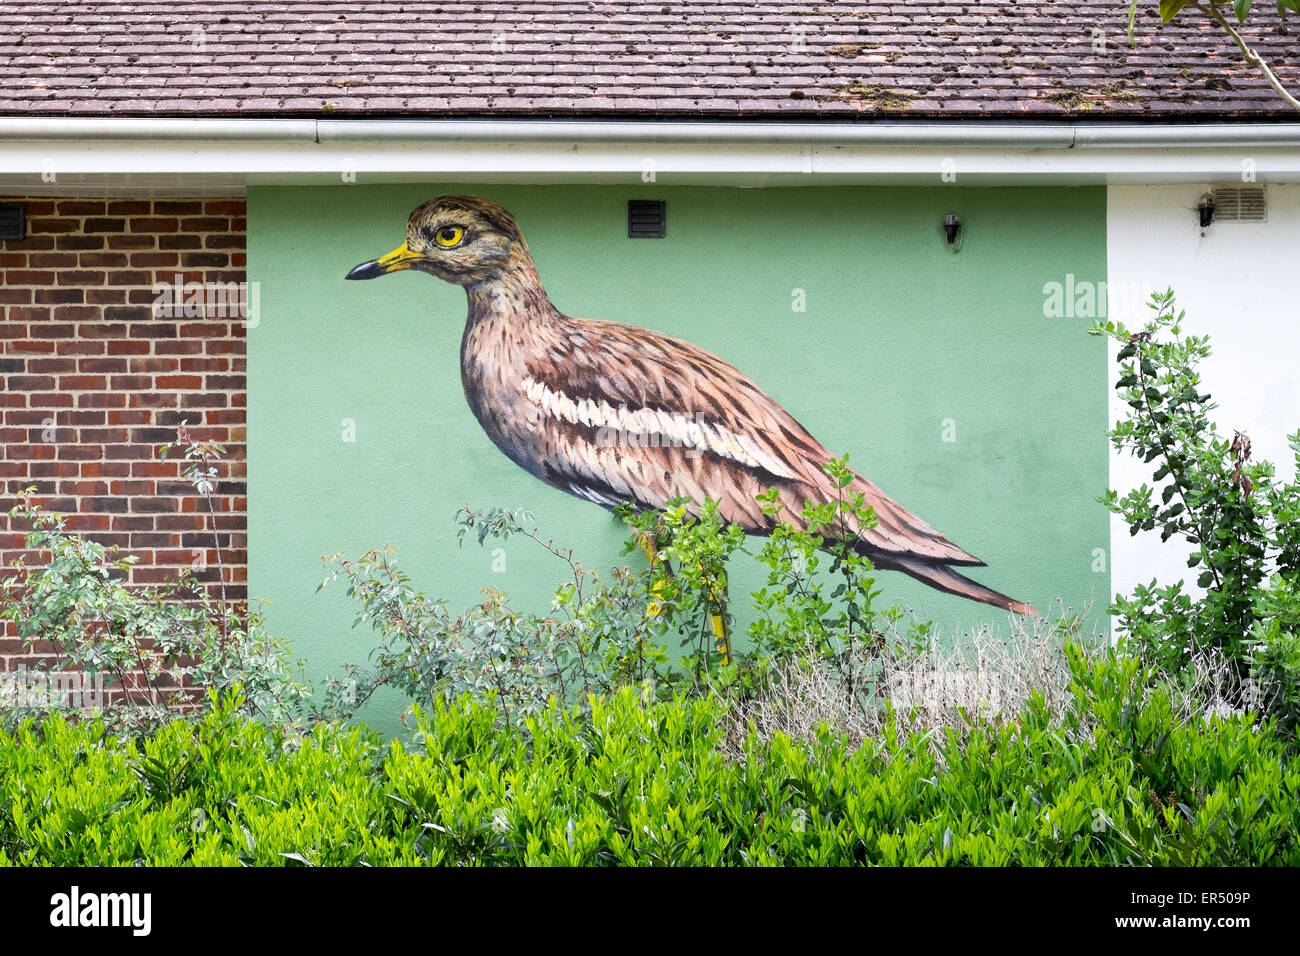 Painted picture of Stone Curlew bird on the side of a UK building Stock Photo